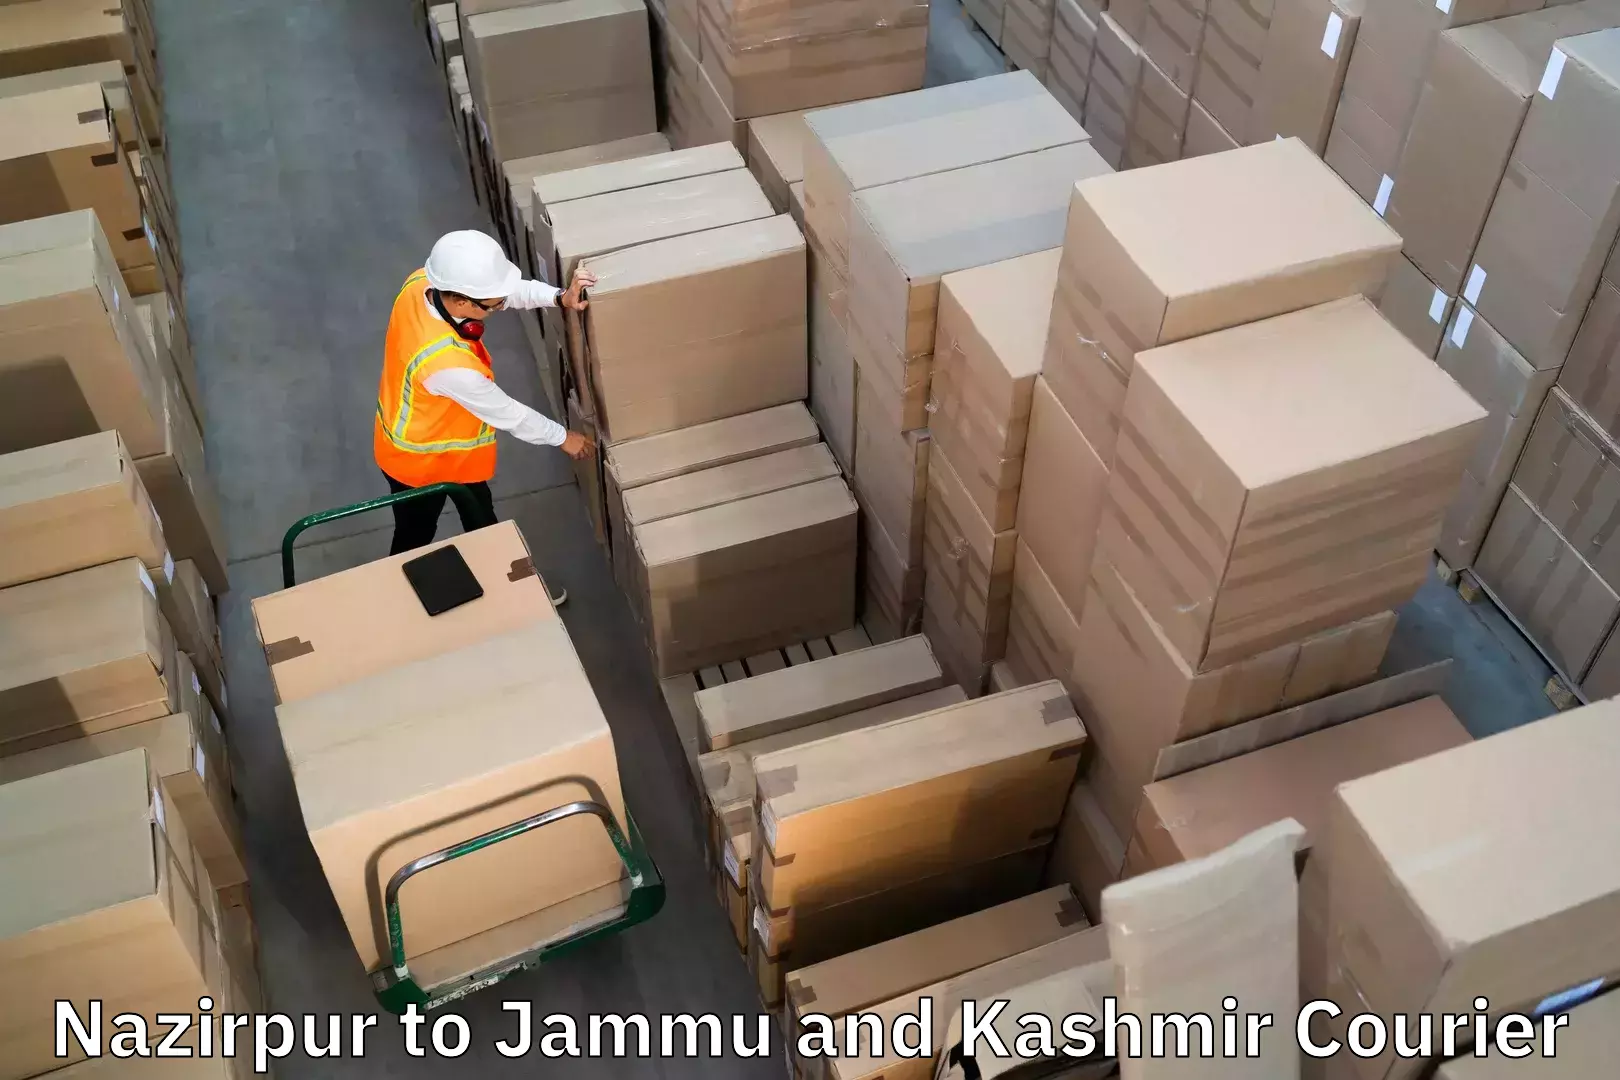 Baggage shipping experts Nazirpur to Poonch